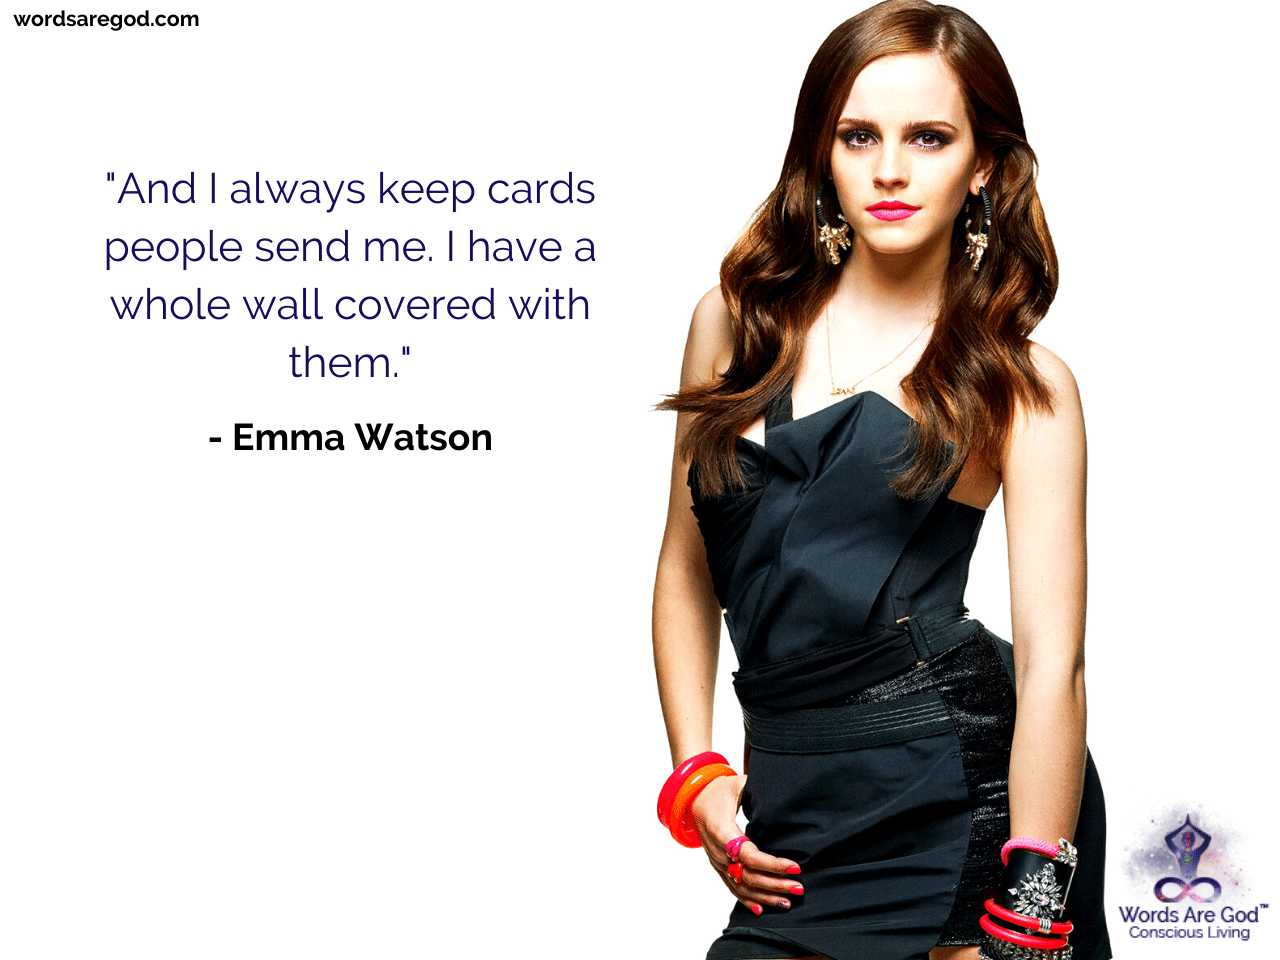 Emma Watson Quotes. Life Quotes Change. Life Quotes Image. Music Quotes